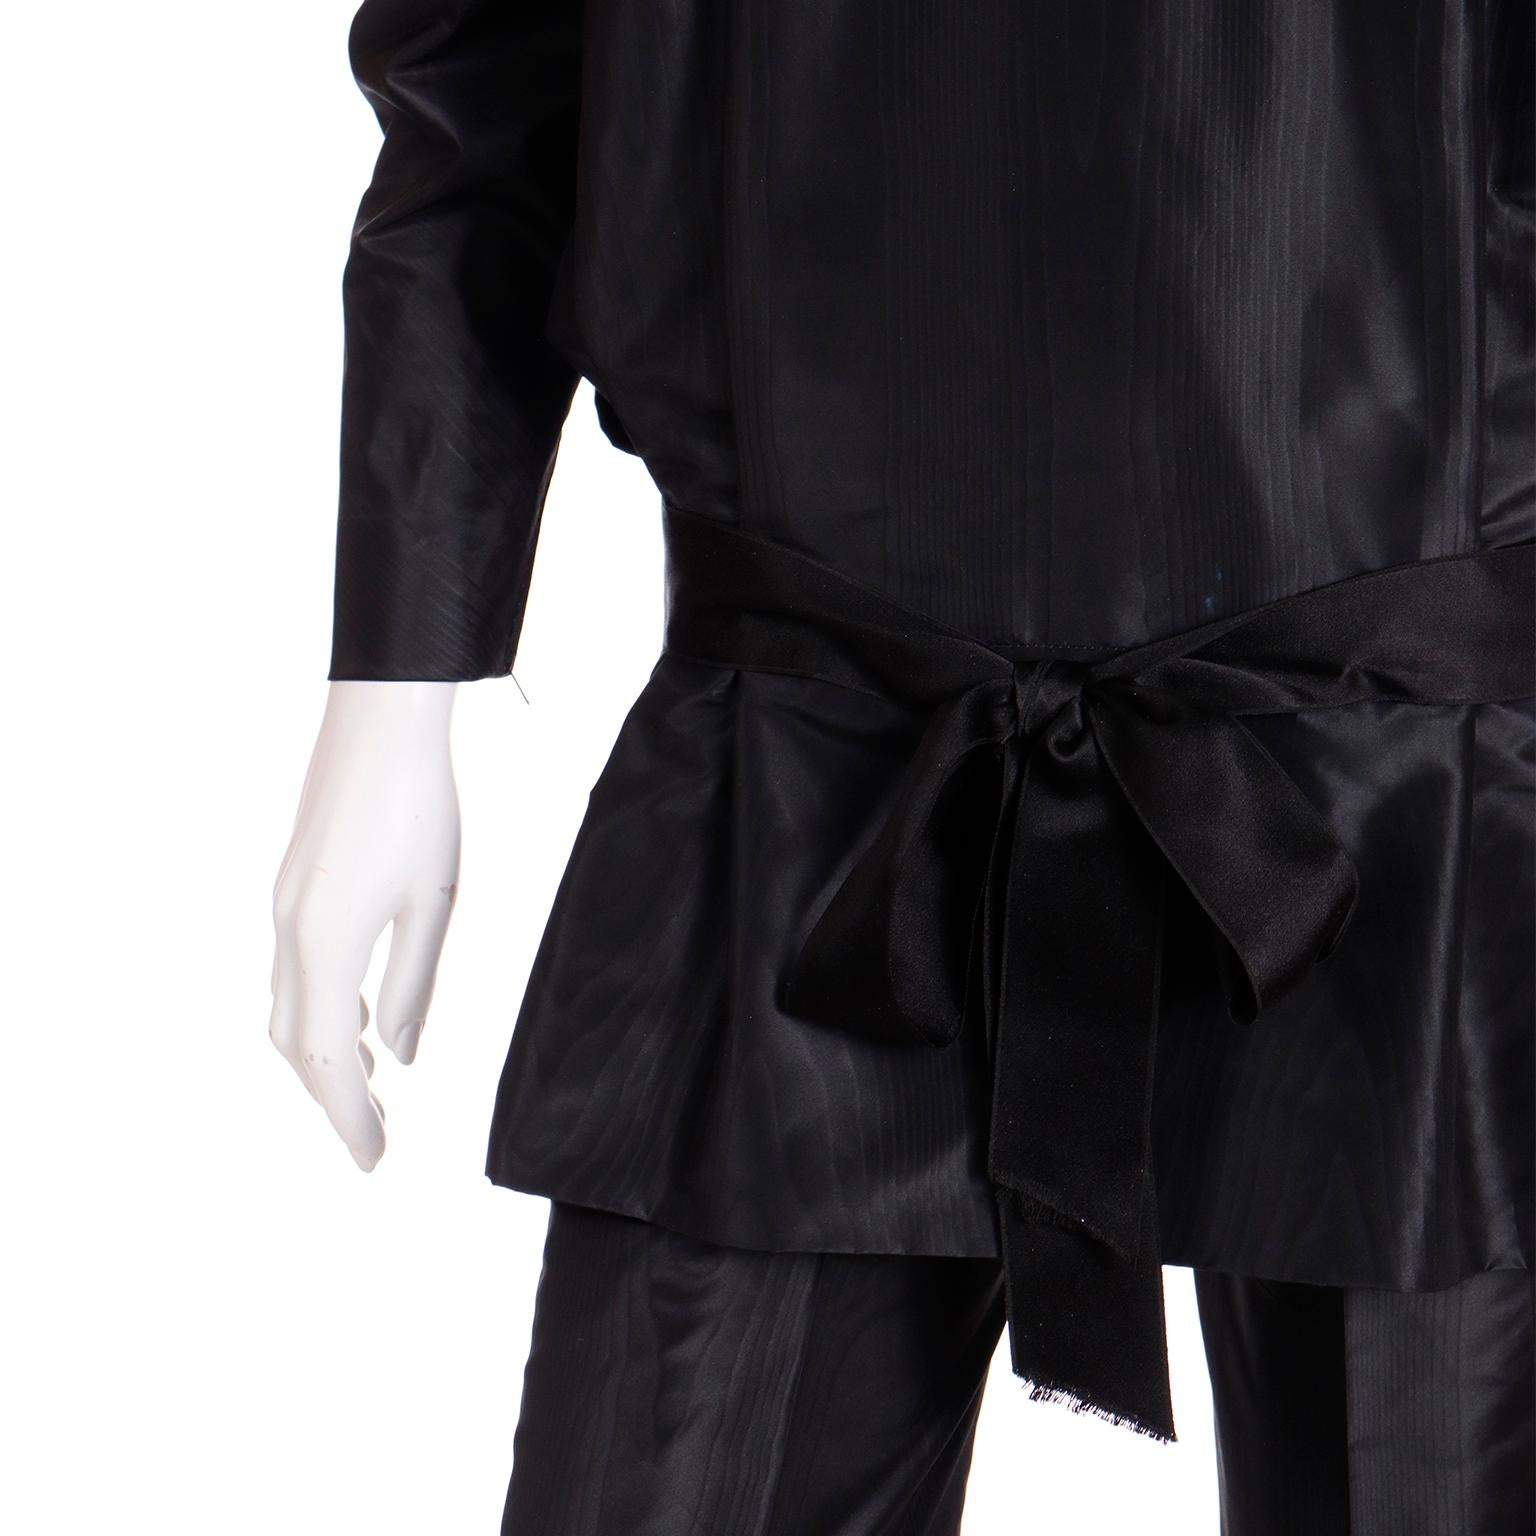 Givenchy Haute Couture Vintage 1980s Black Satin Shorts & Top Outfit 4